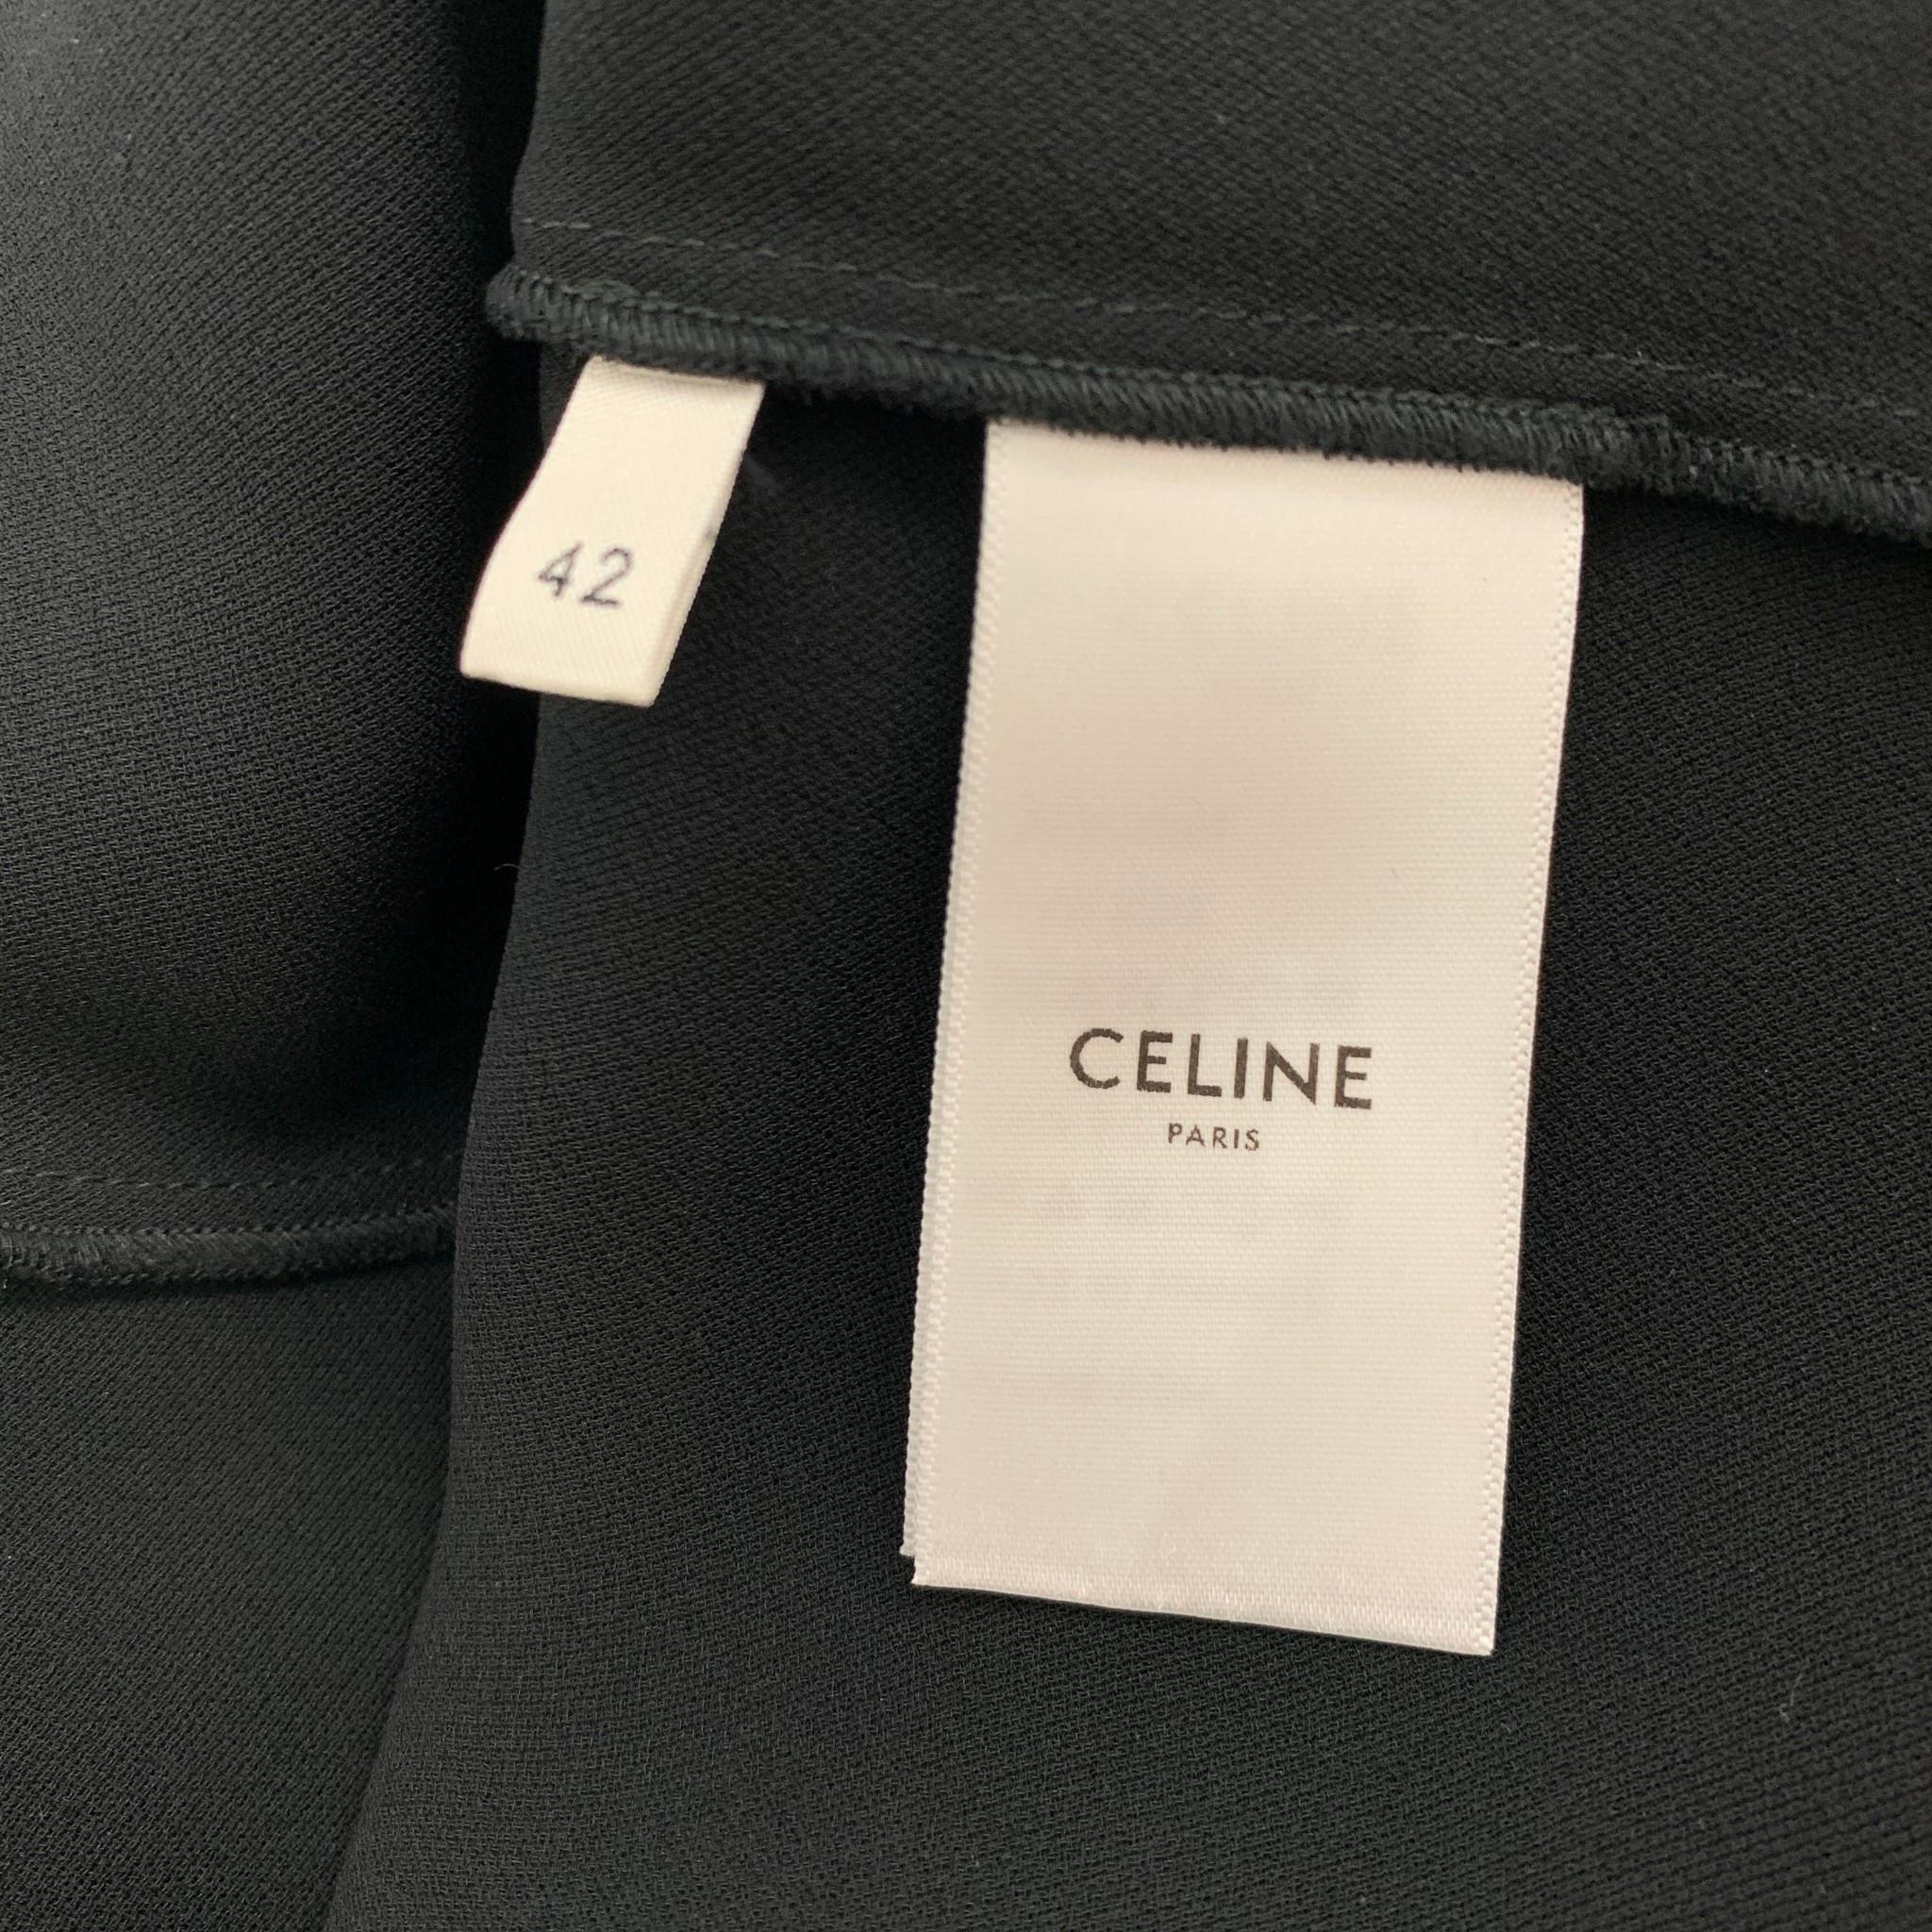 CELINE dress comes in a black stretch silk featuring a asymmetrical design, spaghetti straps, and a slip on style. 

Excellent Pre-Owned Condition.
Marked: 42

Measurements:

Bust: 32 in.
Waist: 26 in.
Hip: 32 in.
Length: 47 in.